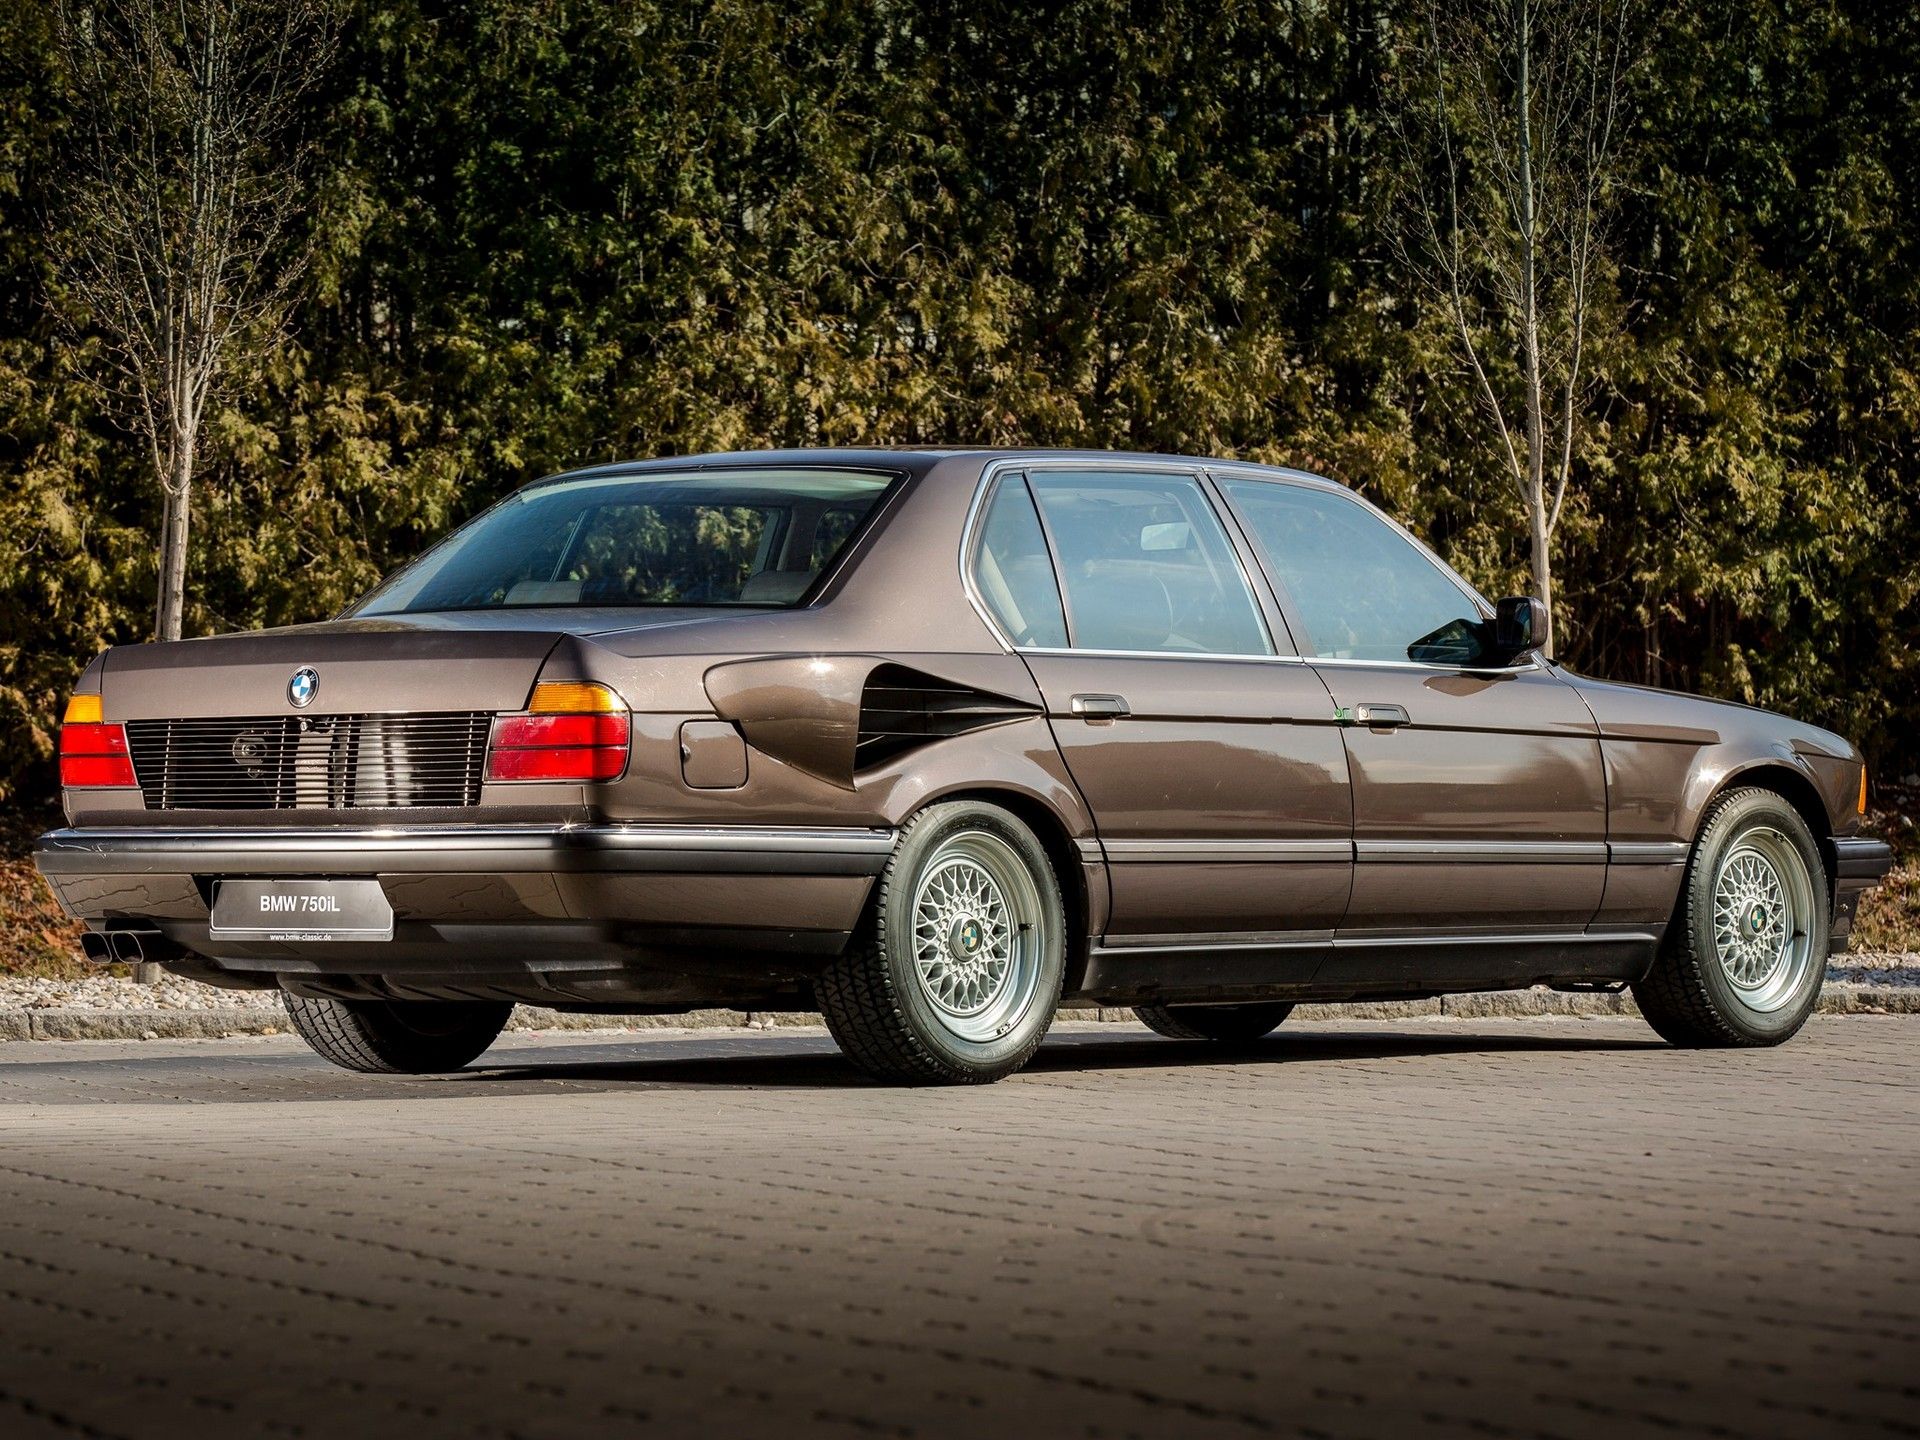 BMW 767iL Goldfisch's V16 Engine Was A Masterpiece That Never Made It Into Production